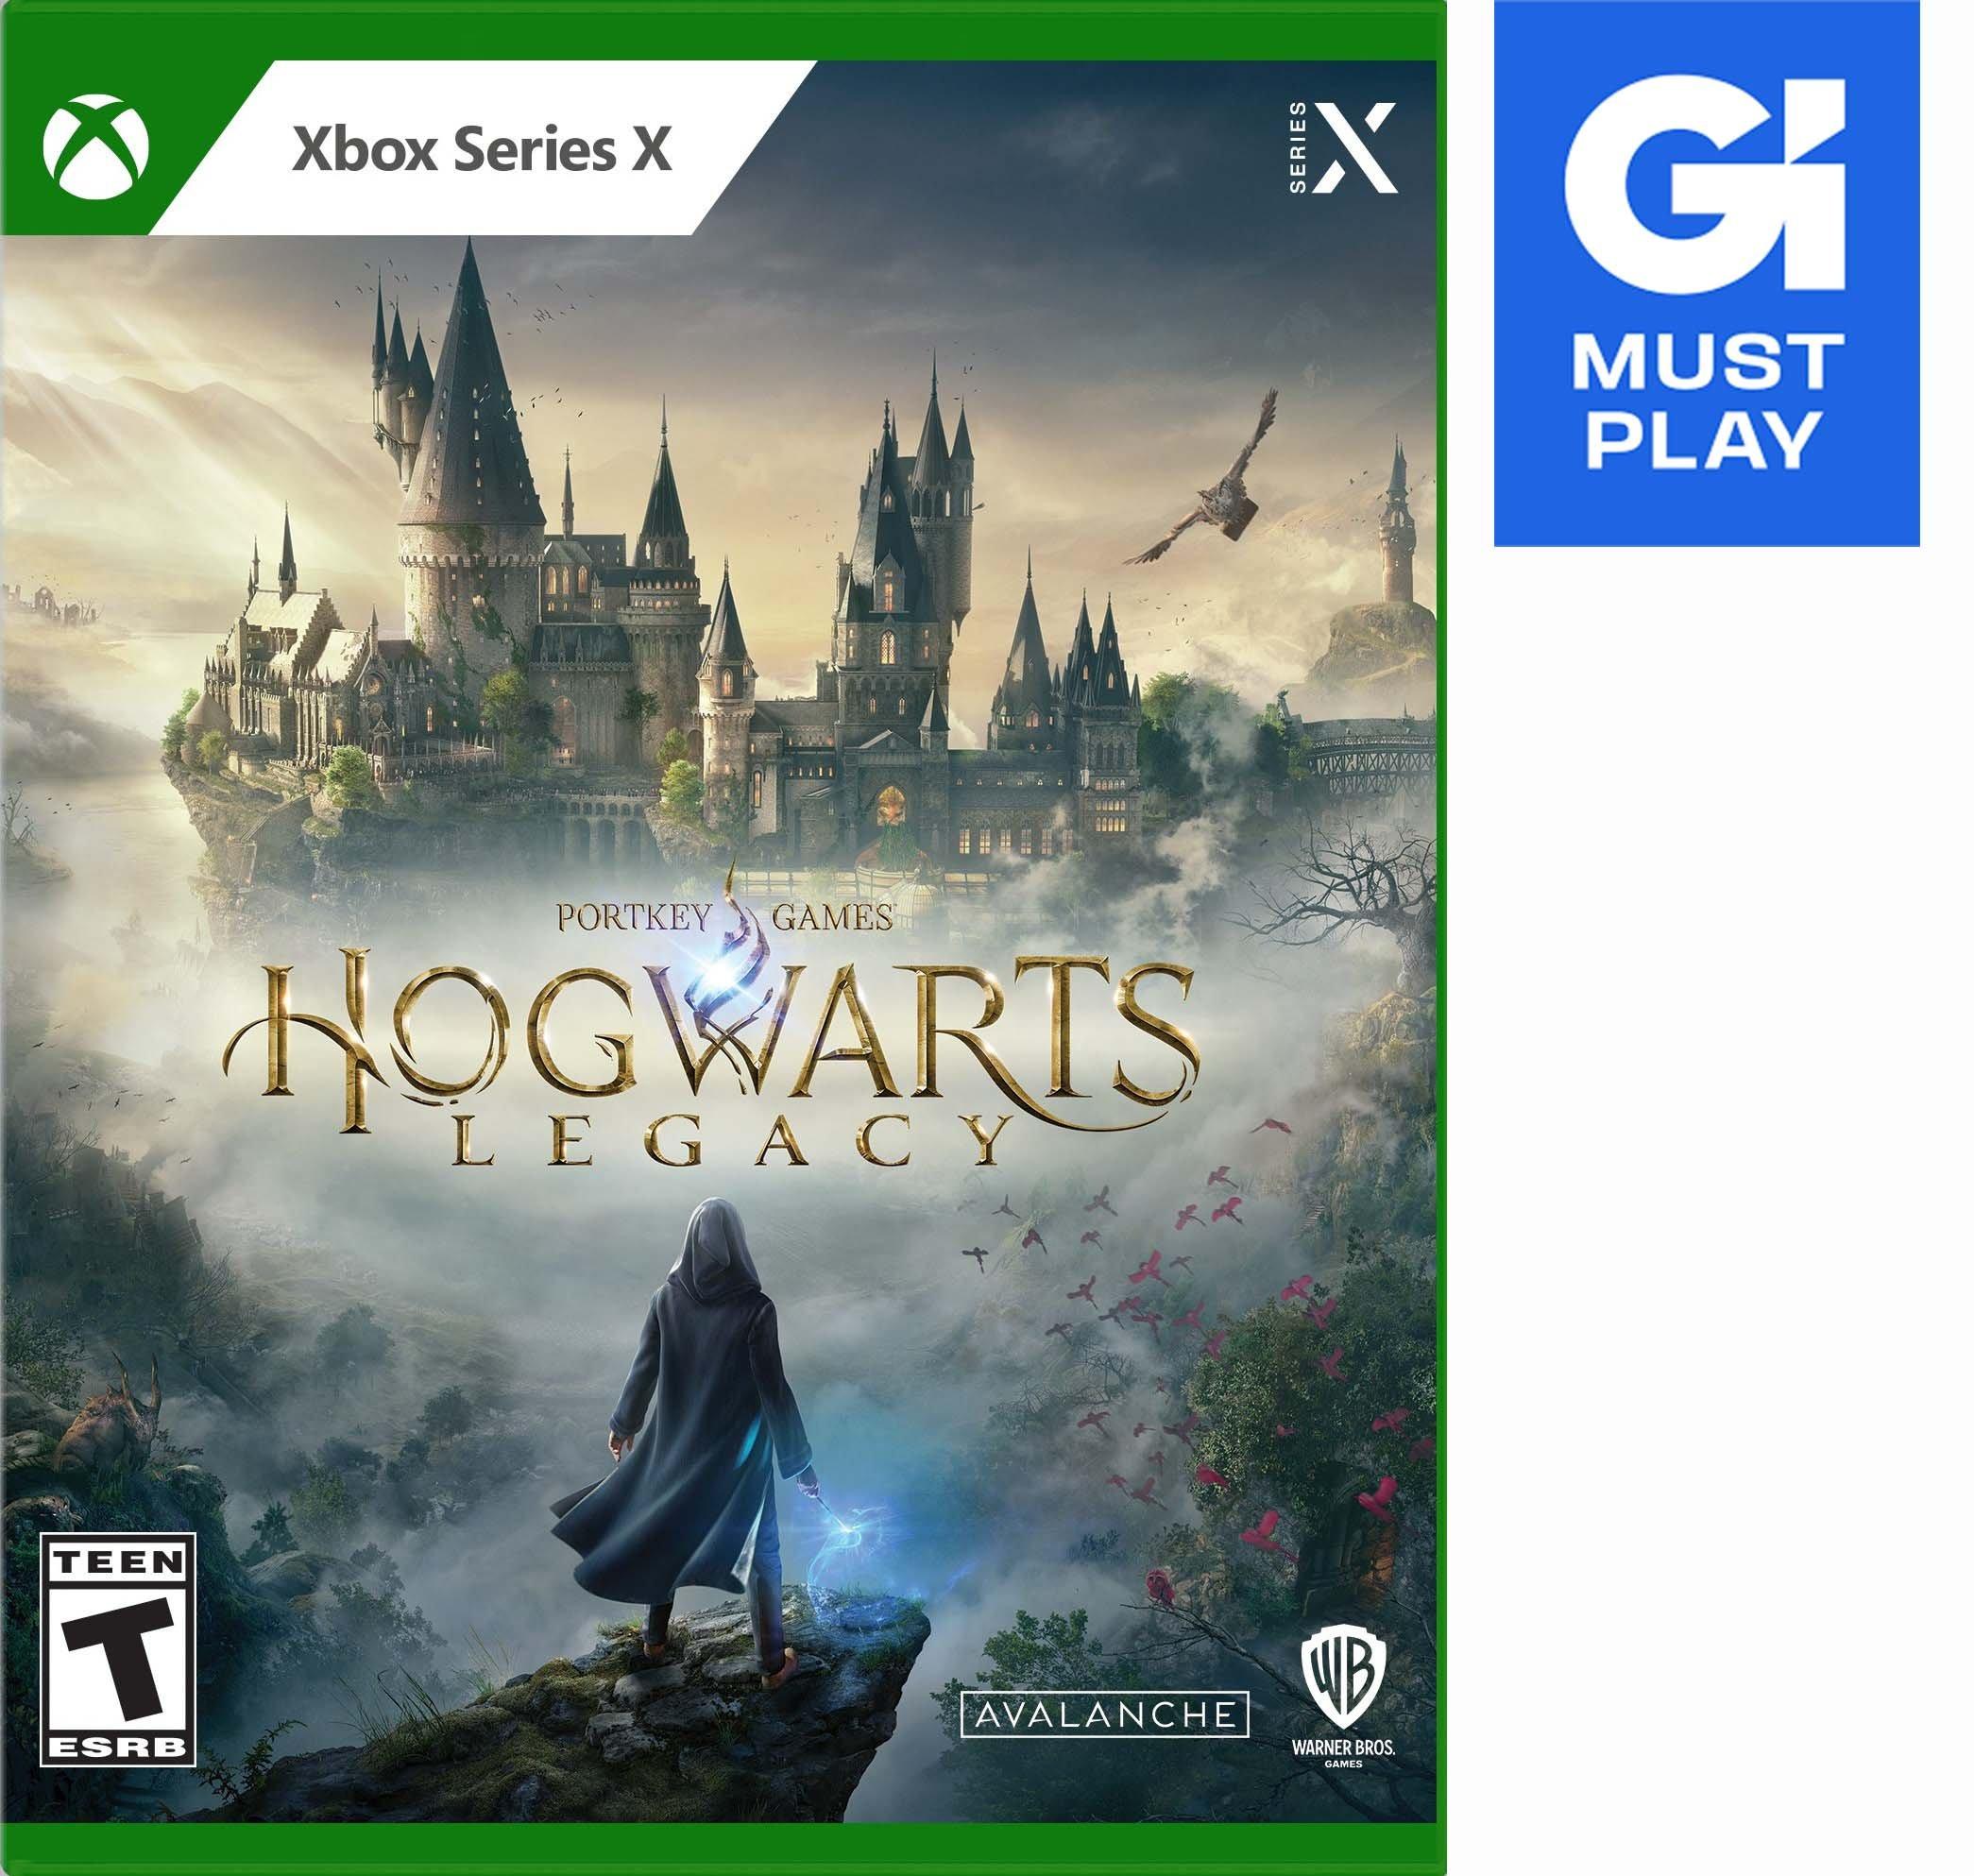 Hogwarts Legacy release date  Harry Potter game for PS4, Xbox